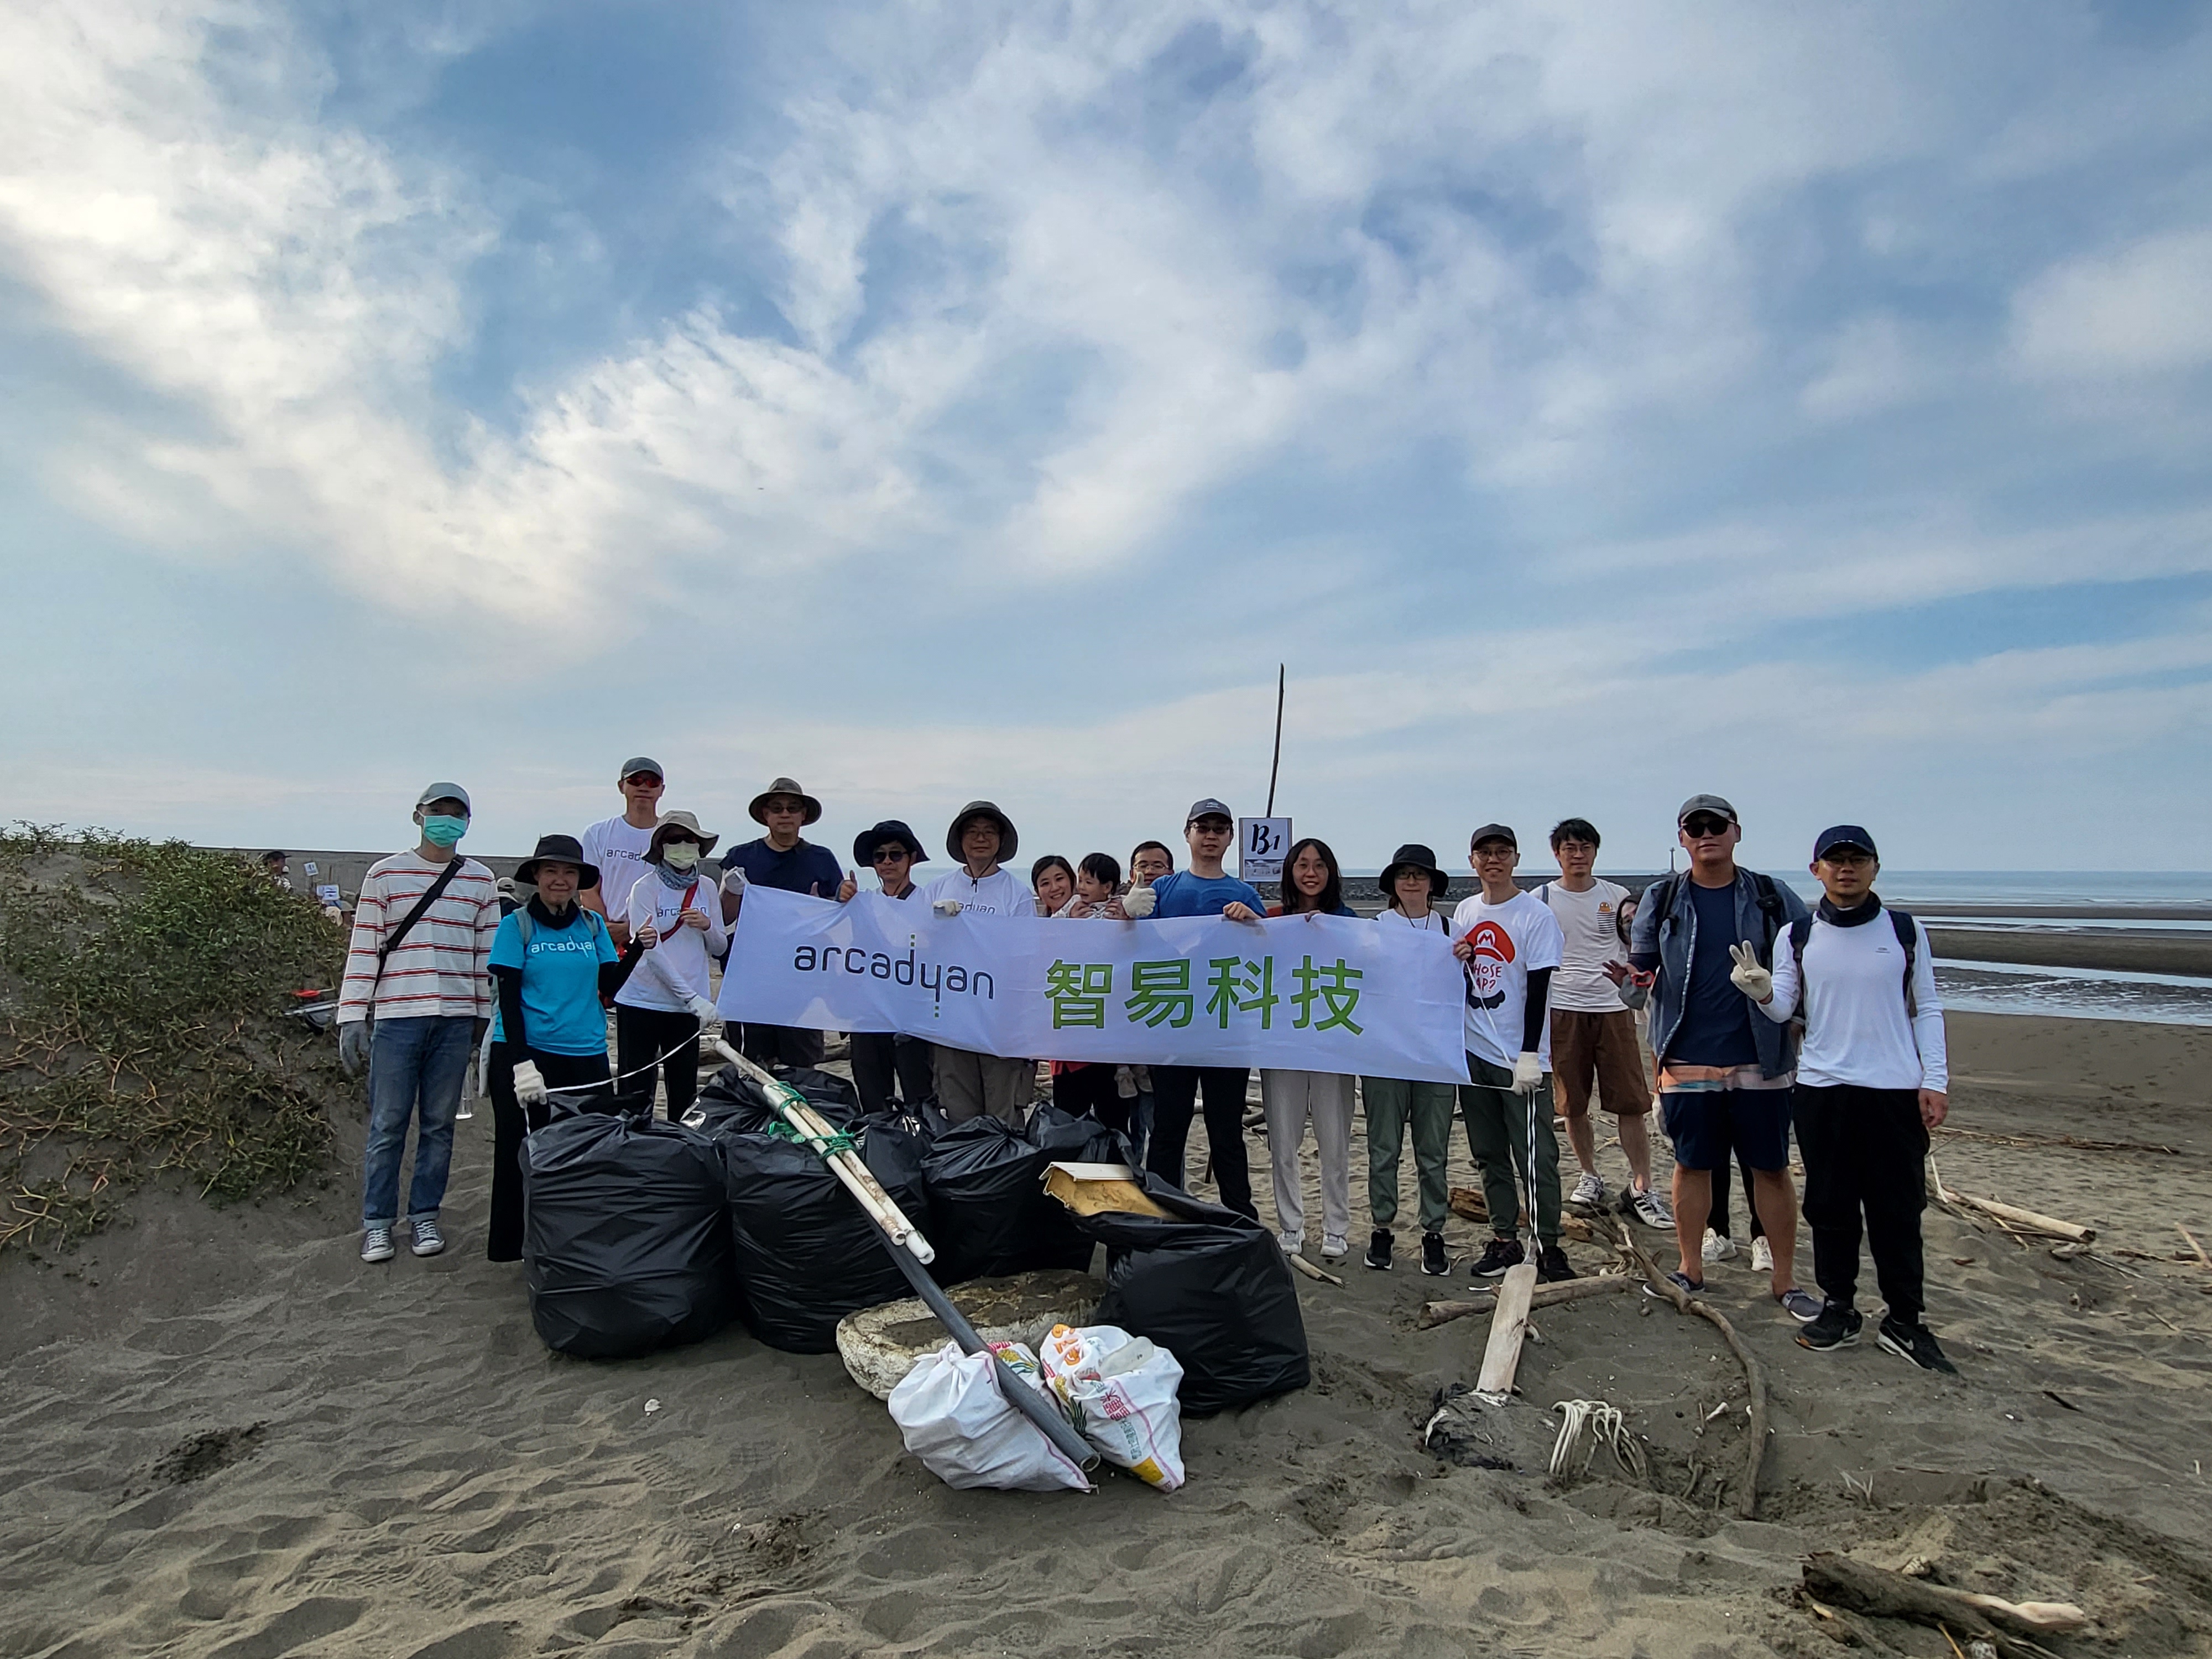 Arcadyan marks International Coastal Cleanup Day by collecting 2,300 kg of marine waste. 4